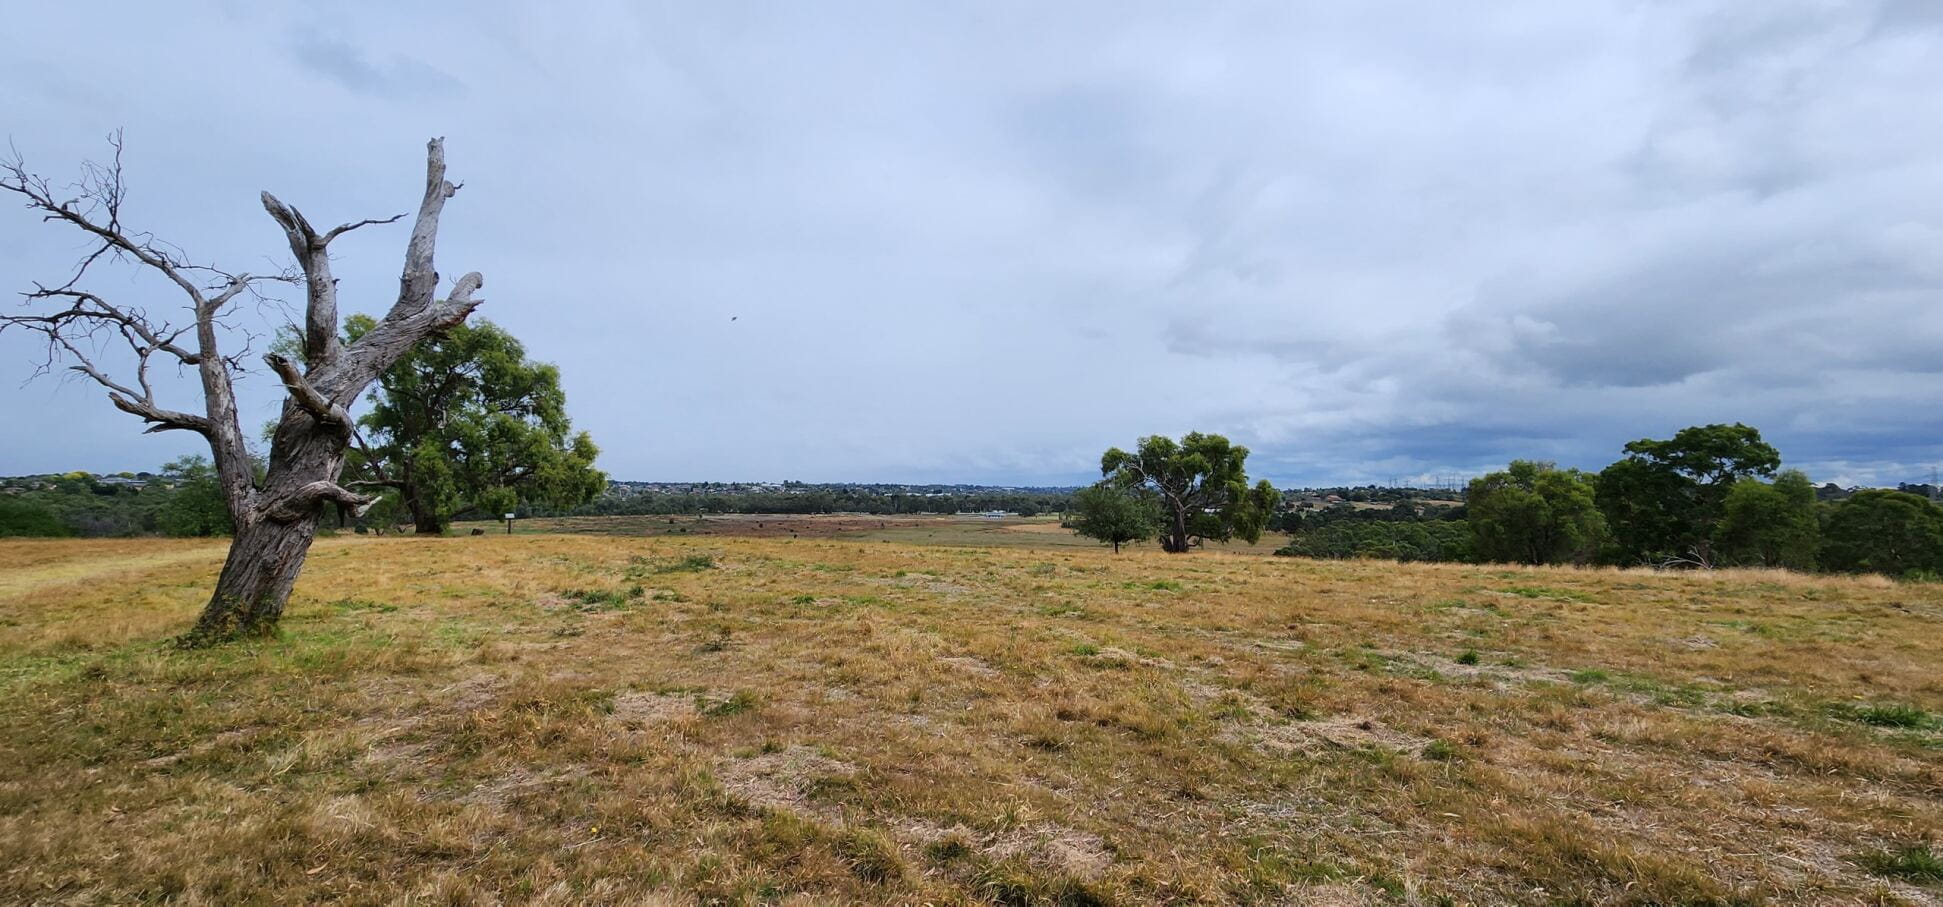 Image shows sweeping view of the reserve and its surrounds. A large leafless tree pokes out of a field of dried grass. A view of houses and power lines can be seen in the difference with a grey sky in the background.